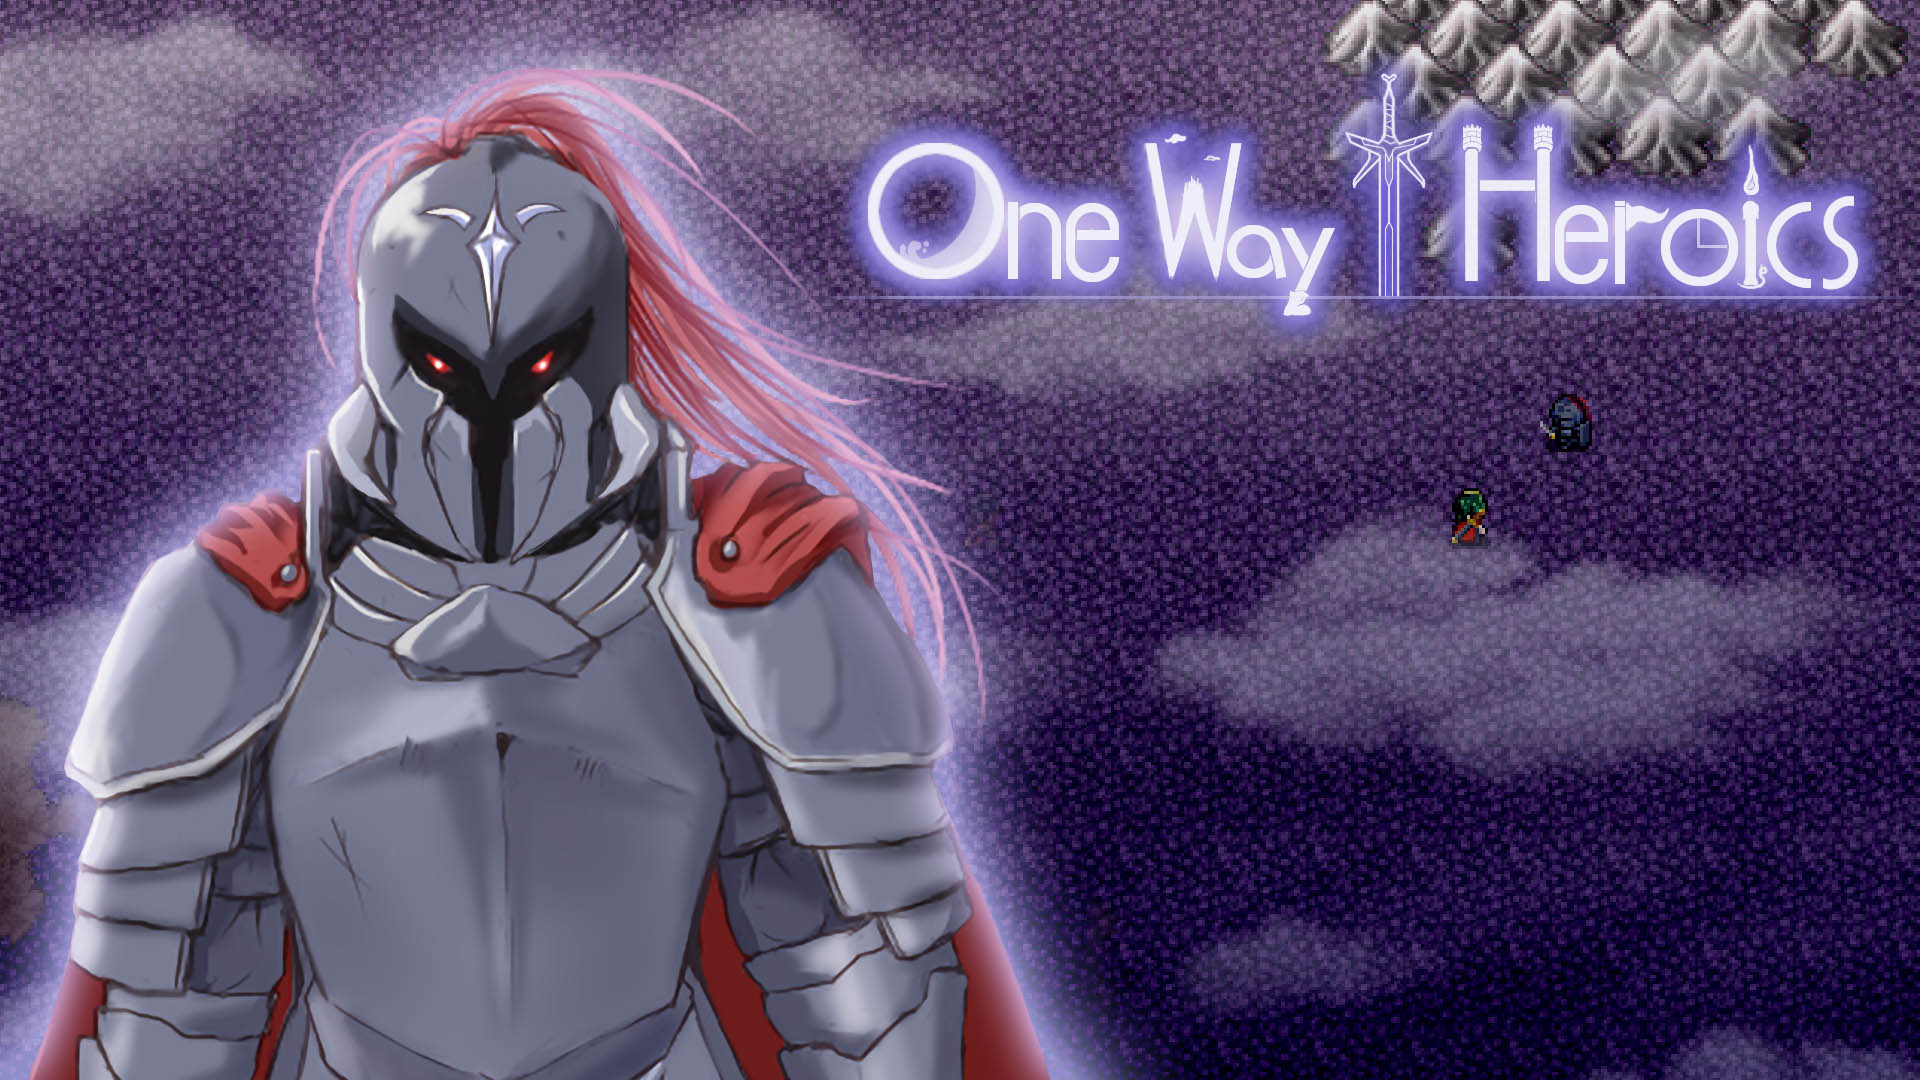 One Way Heroics Backgrounds, Compatible - PC, Mobile, Gadgets| 1920x1080 px